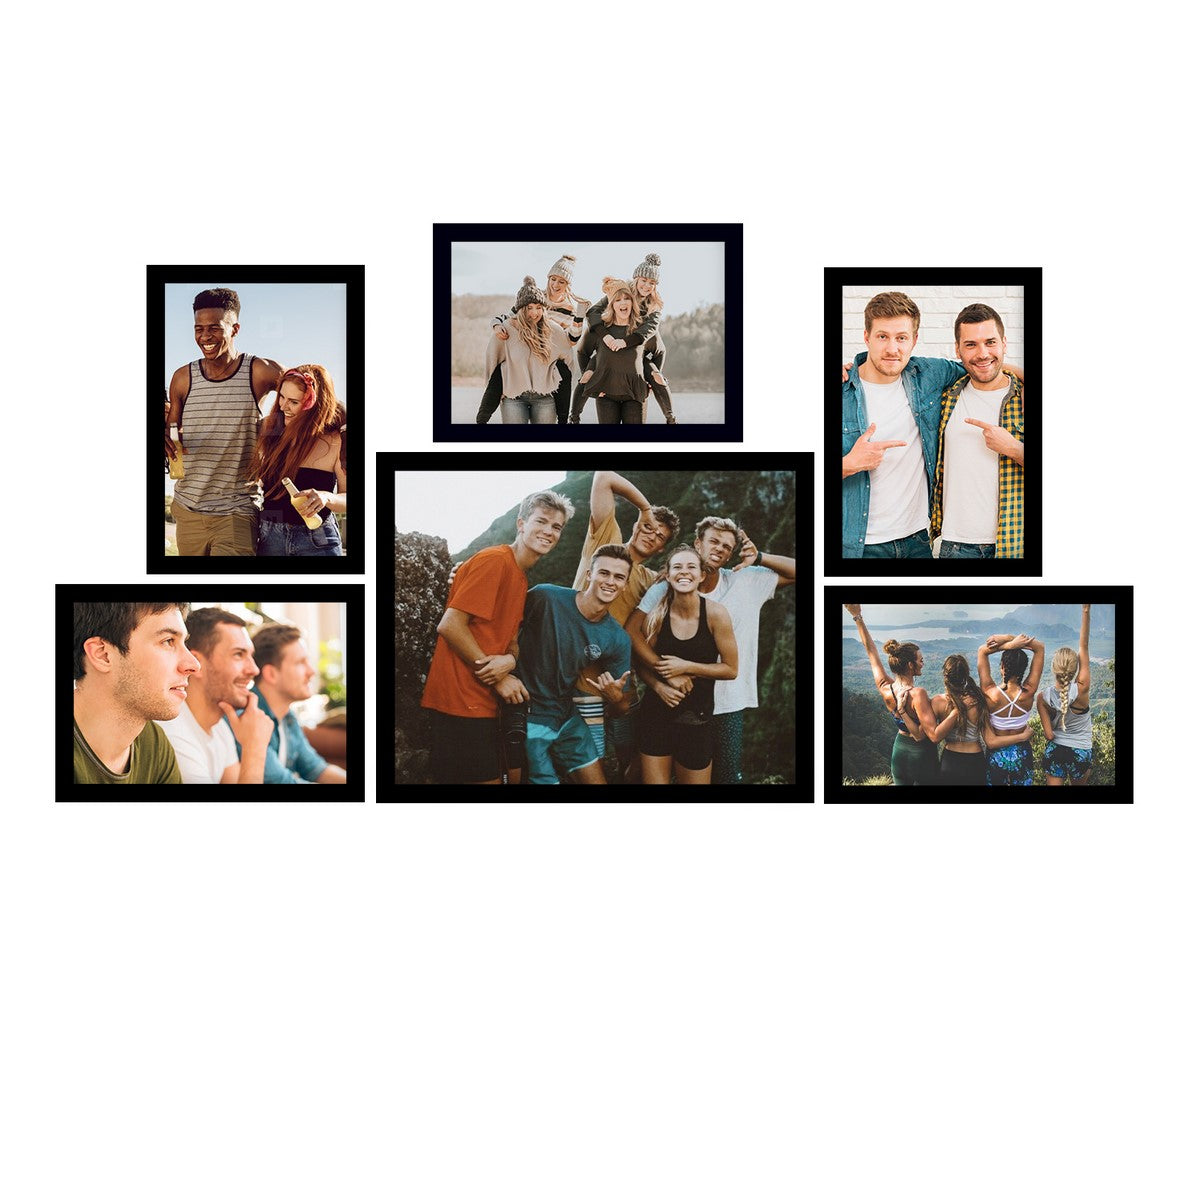 Memory Wall Collage Photo Frame - Set of 6 Photo Frames for 5 Photos of 5"x7", 1 Photos of 8"x10"